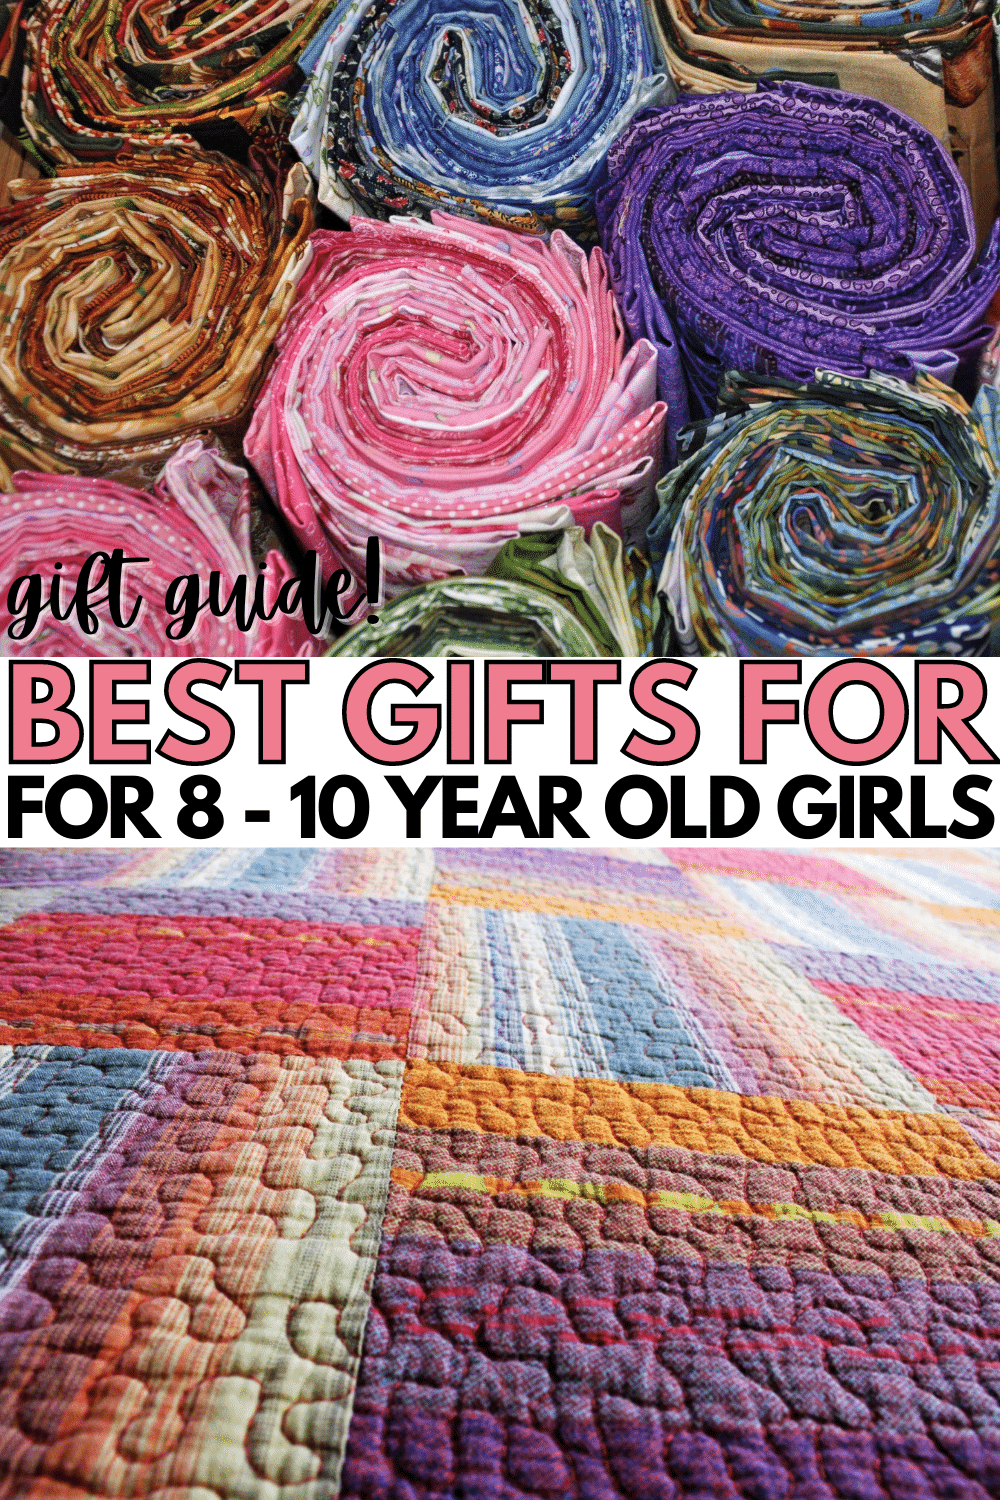 Here's a list of the best gifts for 8-10 year old girls to help anyone who is at a loss as to what girls in this age range like. #giftguide #giftideas #forher #giftsforgirls via @wondermomwannab